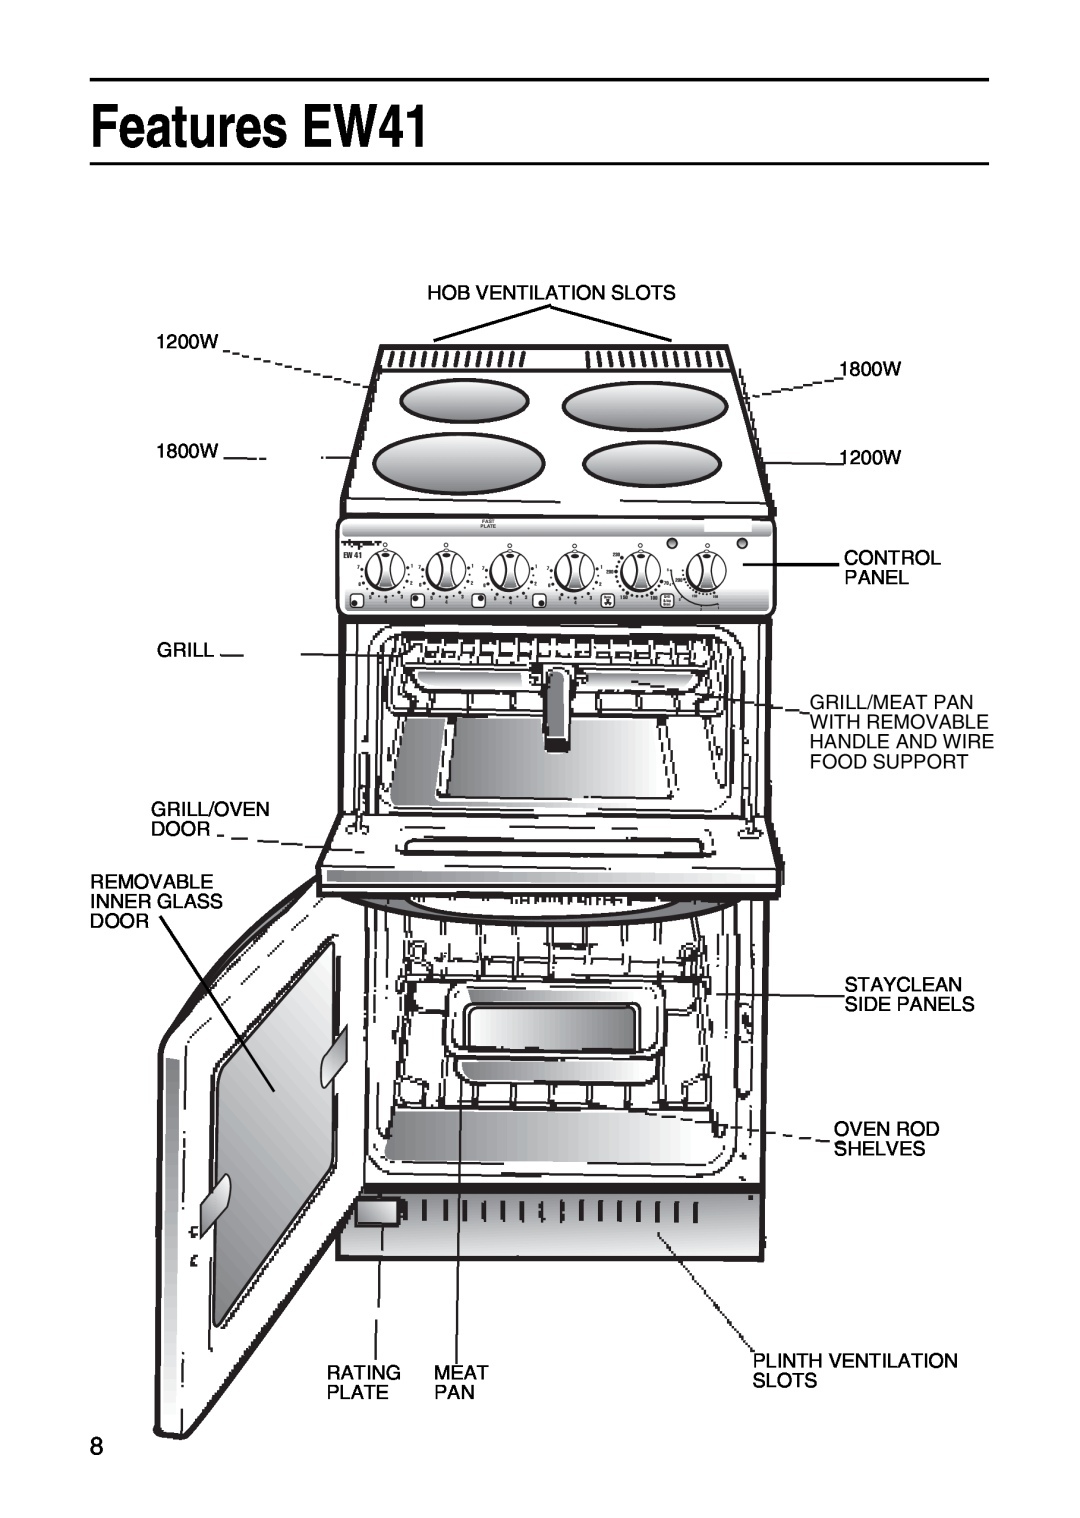 Hotpoint Features EW41, HOB VENTILATION SLOTS 1200W 1800W, Grill Grill/Oven Door Removable Inner Glass Door, Fast Plate 